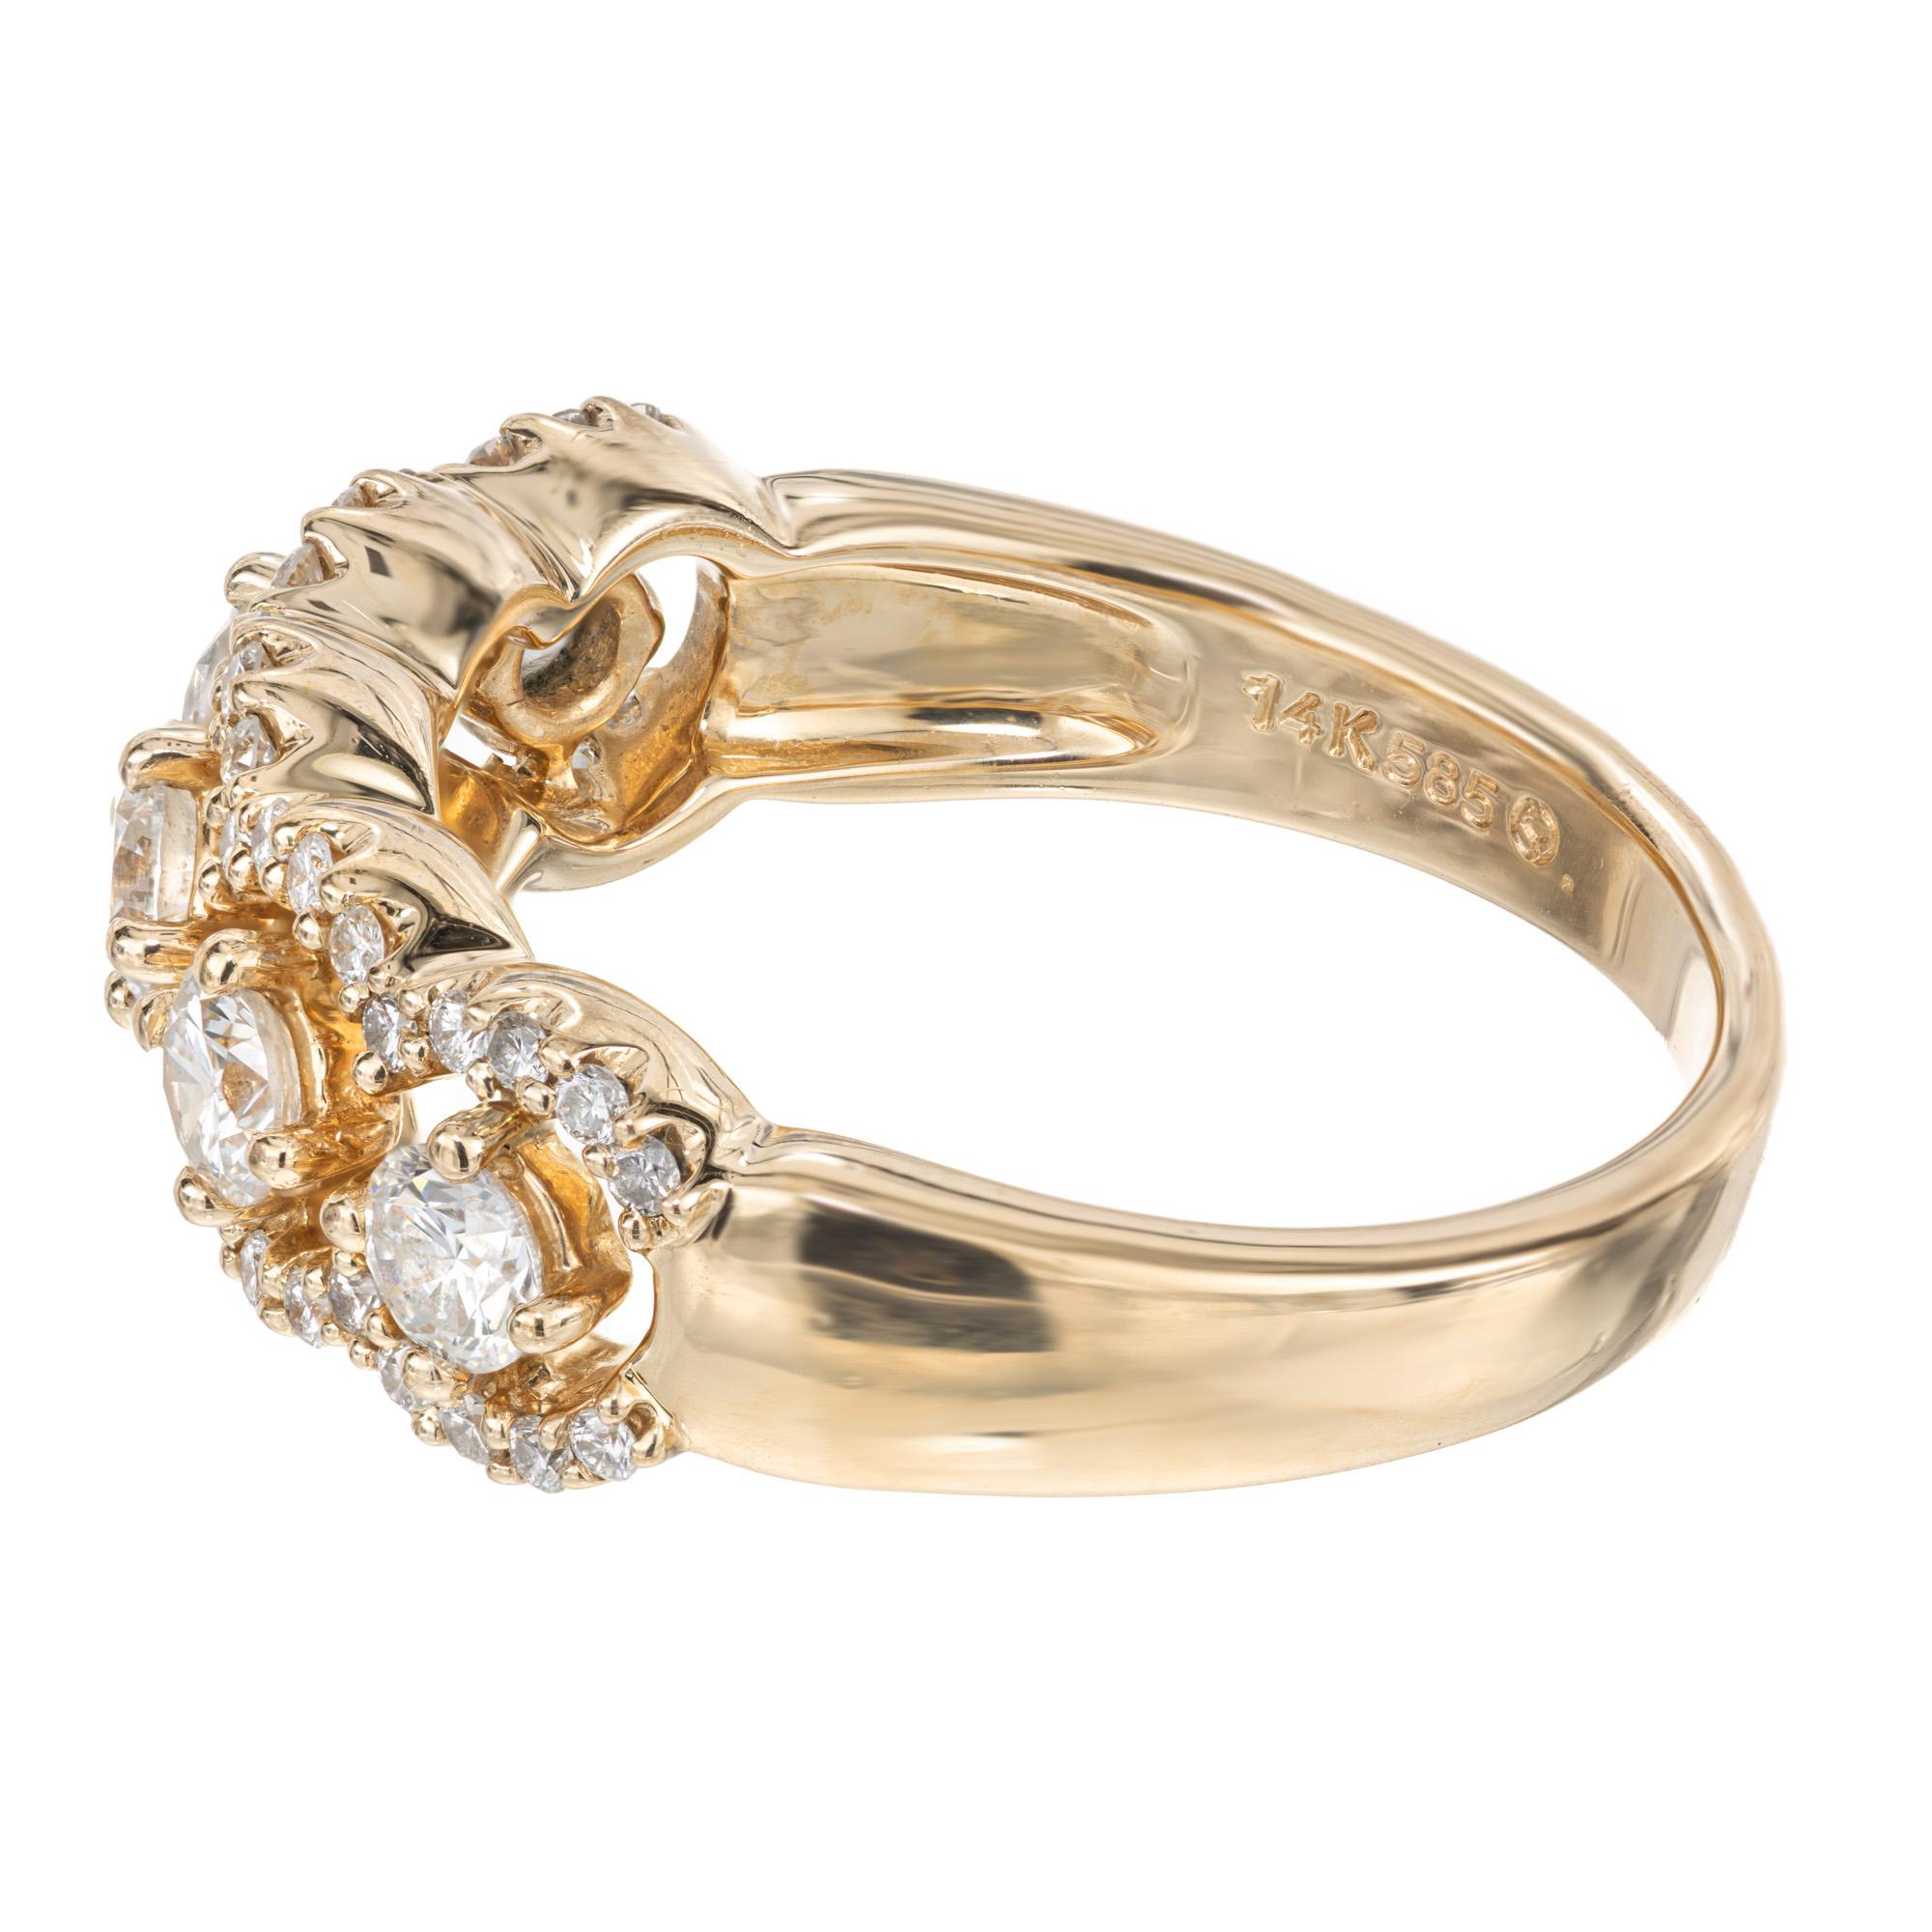 1.02 Carat Diamond Halo Yellow Gold Scroll Band Ring In Good Condition For Sale In Stamford, CT